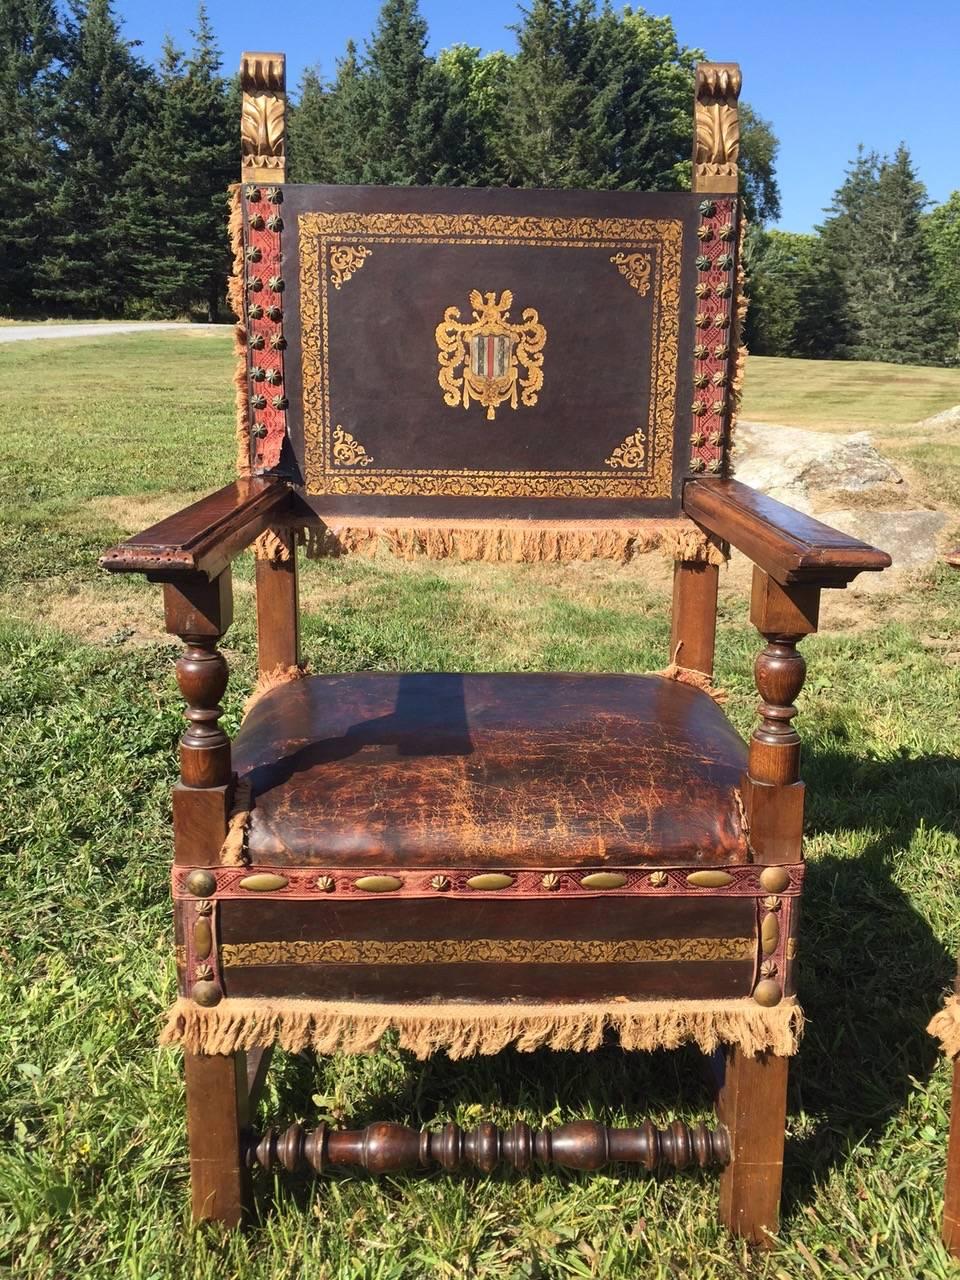 Very impressive grand and fancy pair of midieval large throne chairs having elaborately tooled leather carved walnut frames, brass nailheads and decorative fringe.
They have two beautiful gold acanthus leaf finials on each chair. The dimensions of